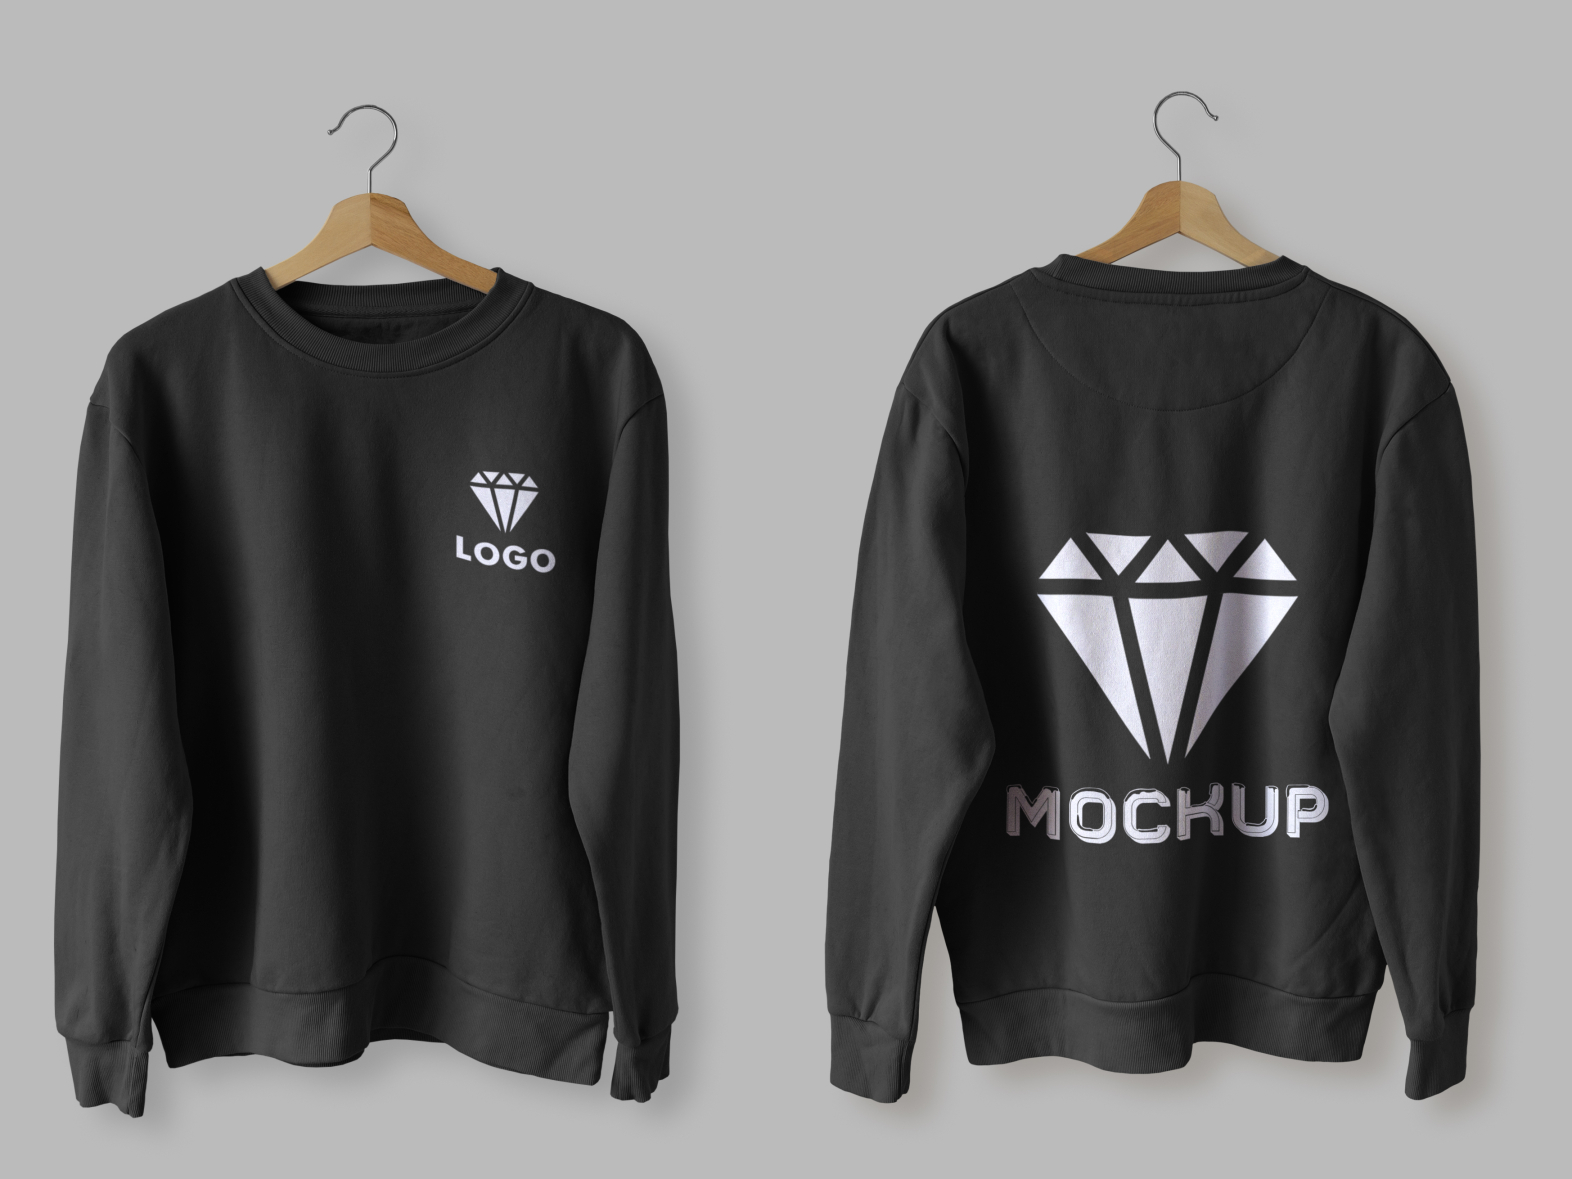 Hoodie front and back mockup by Sadik Hossain on Dribbble